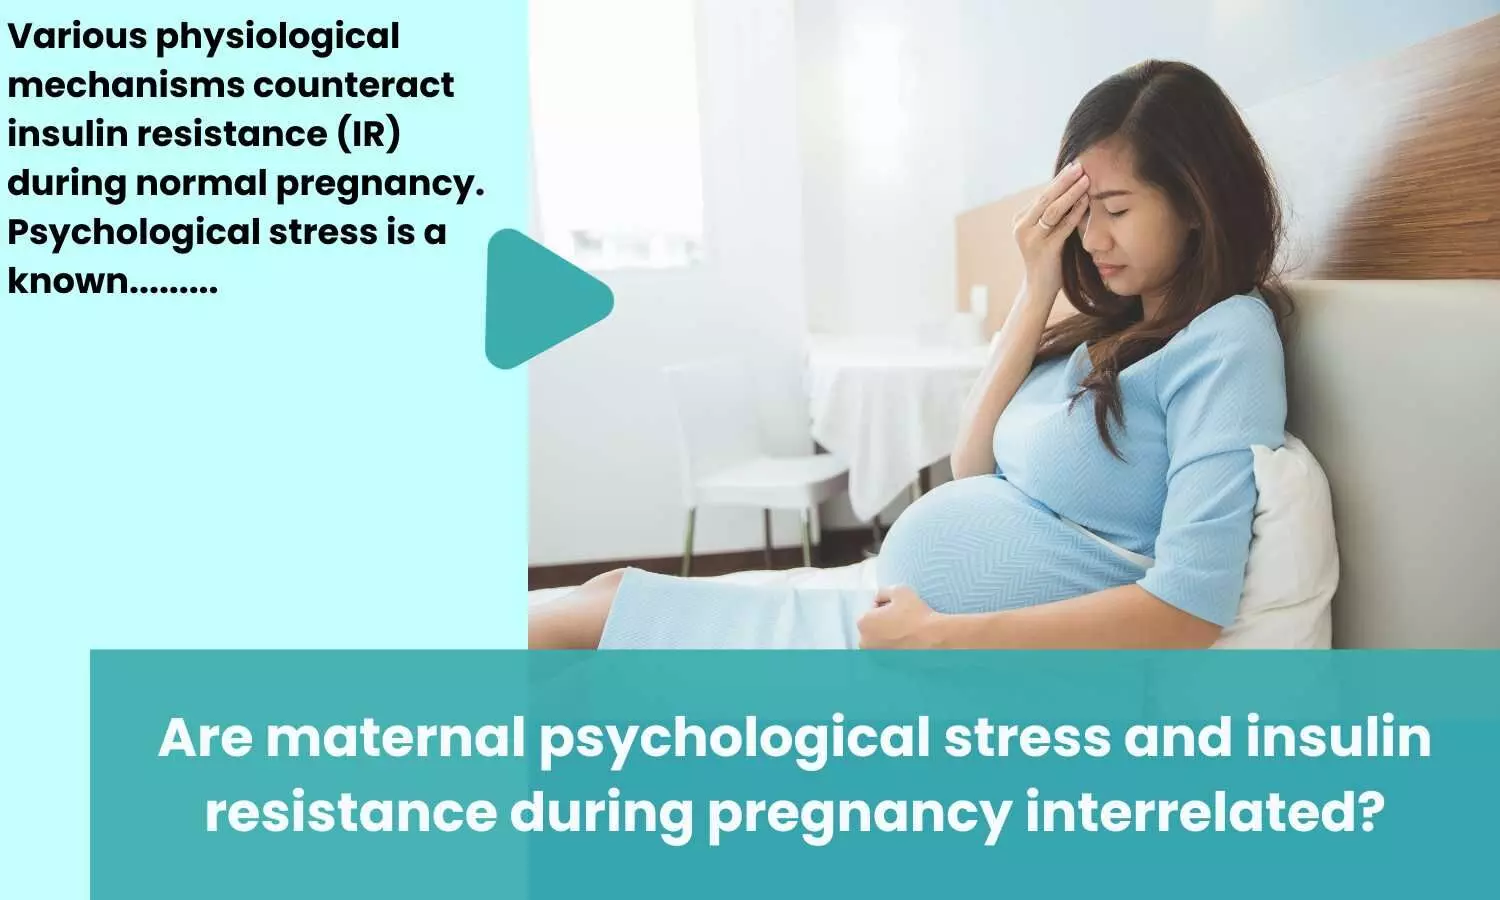 Journal Club-Are maternal psychological stress and insulin resistance during pregnancy interrelated?